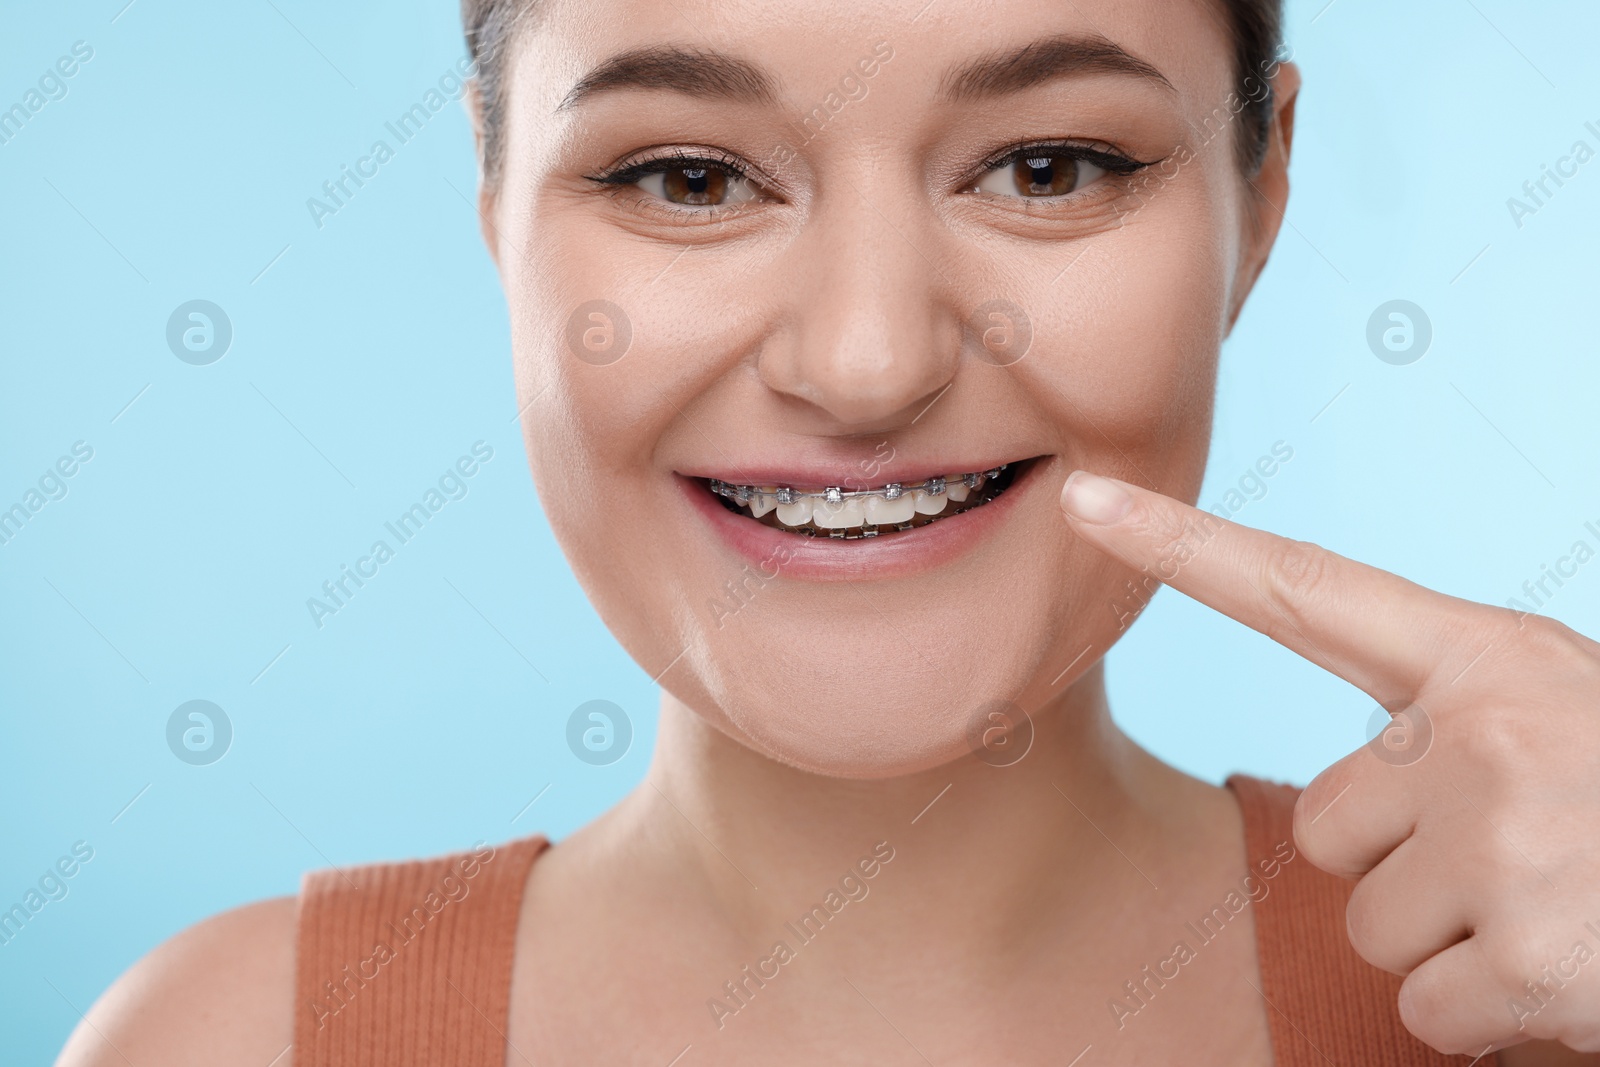 Photo of Smiling woman pointing at braces on her teeth against light blue background, closeup